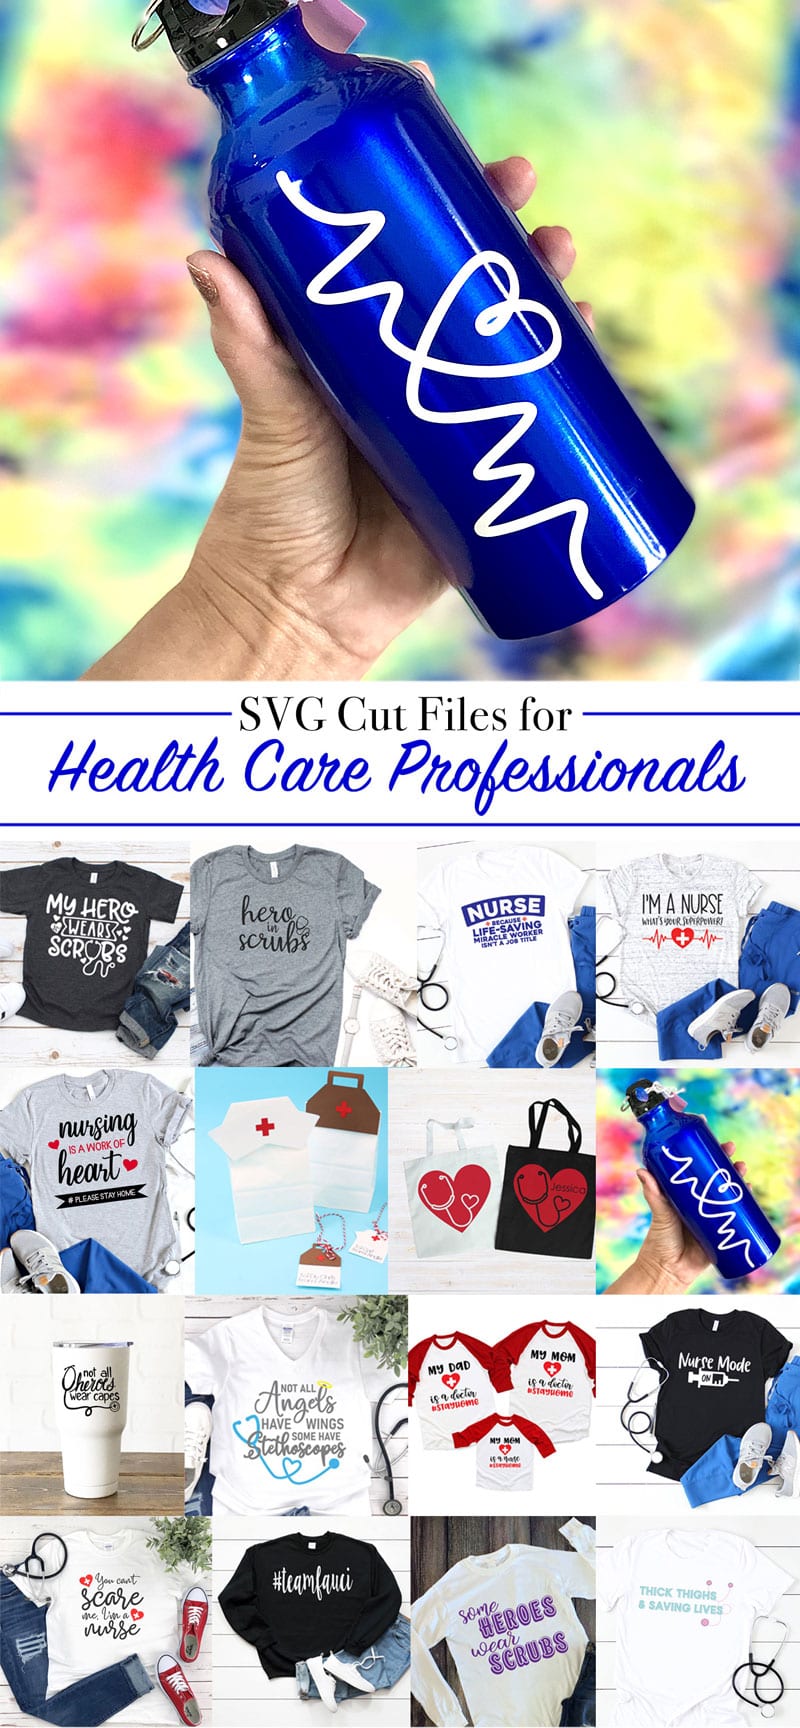 SVG Cut Files to thank Health Care Professionals - Make projects with Free SVG files